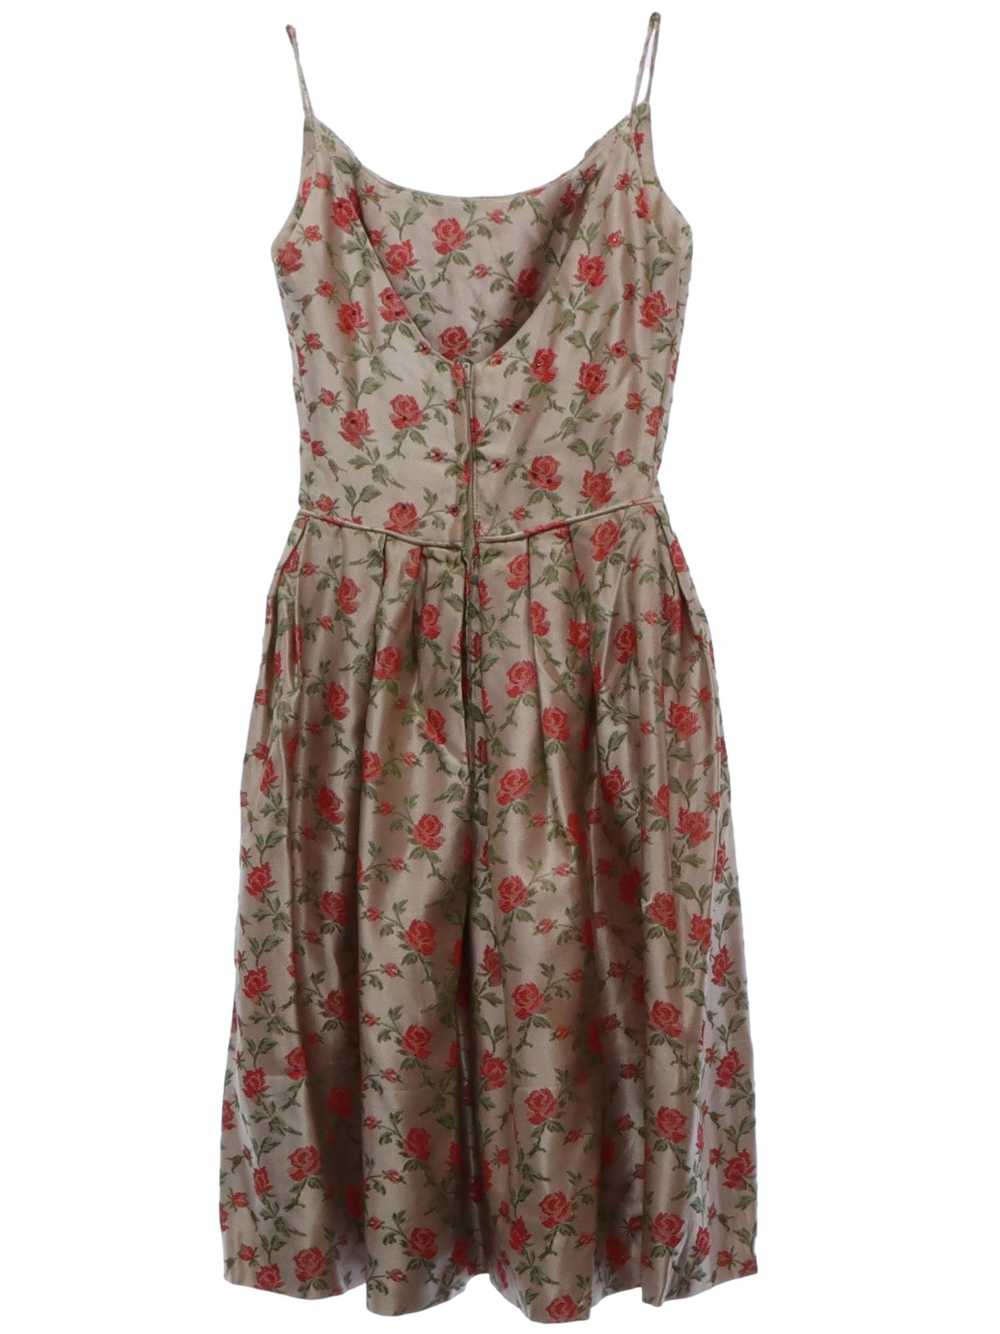 1960's or Girls Cocktail Dress - image 3